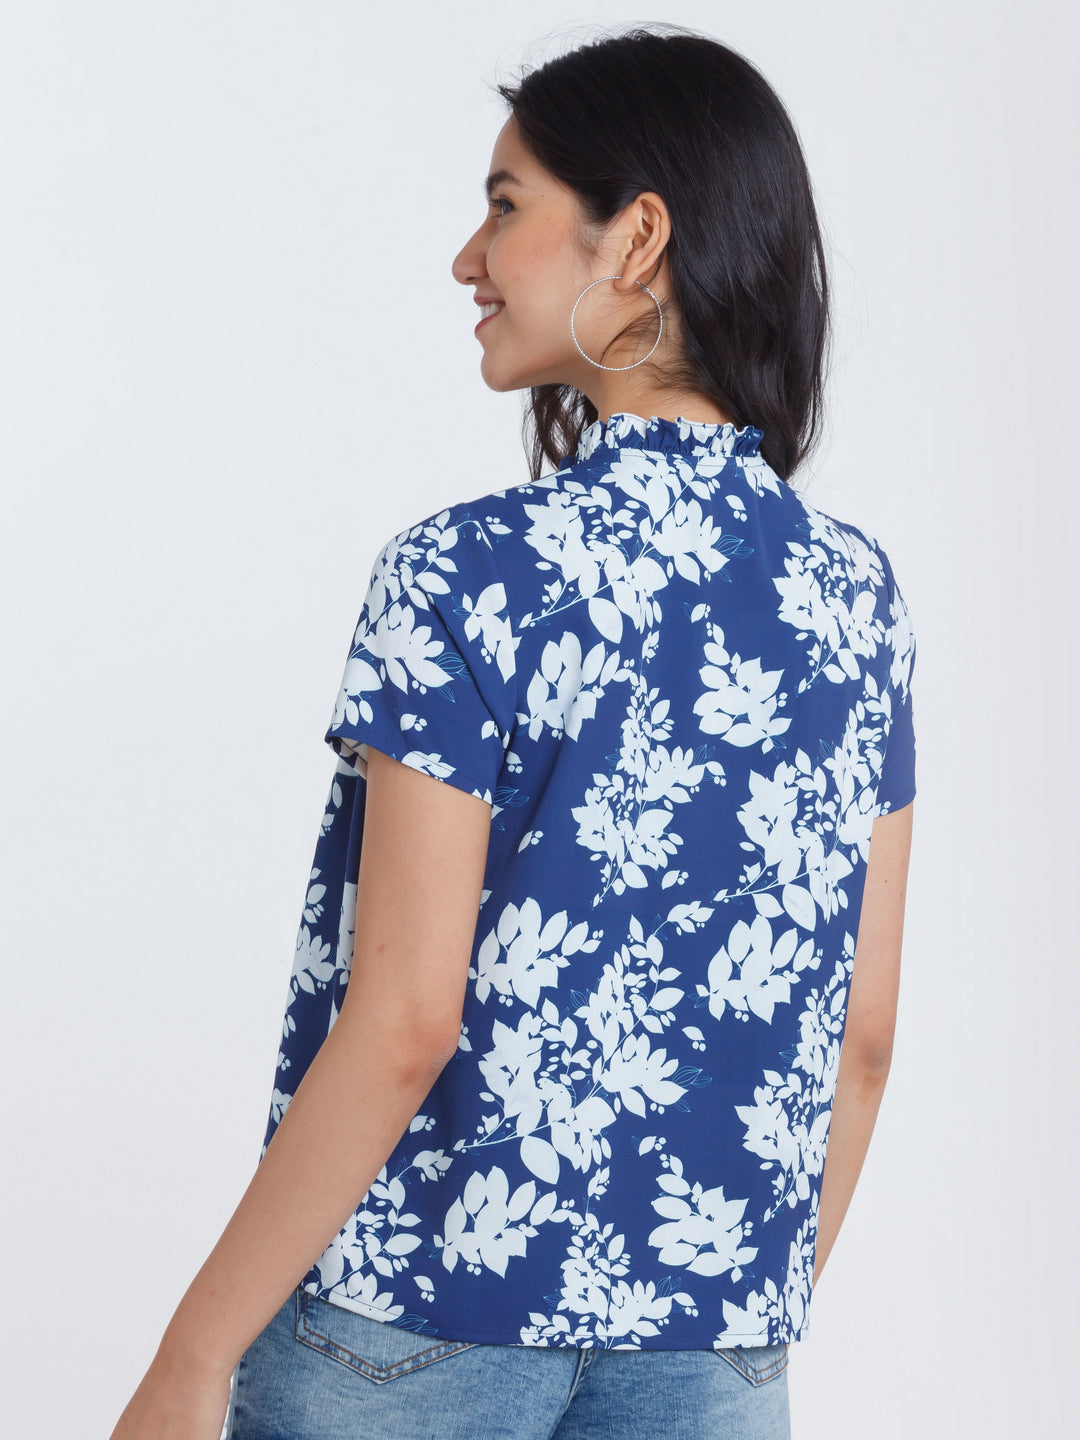 Navy Blue Printed Ruffled Top For Women